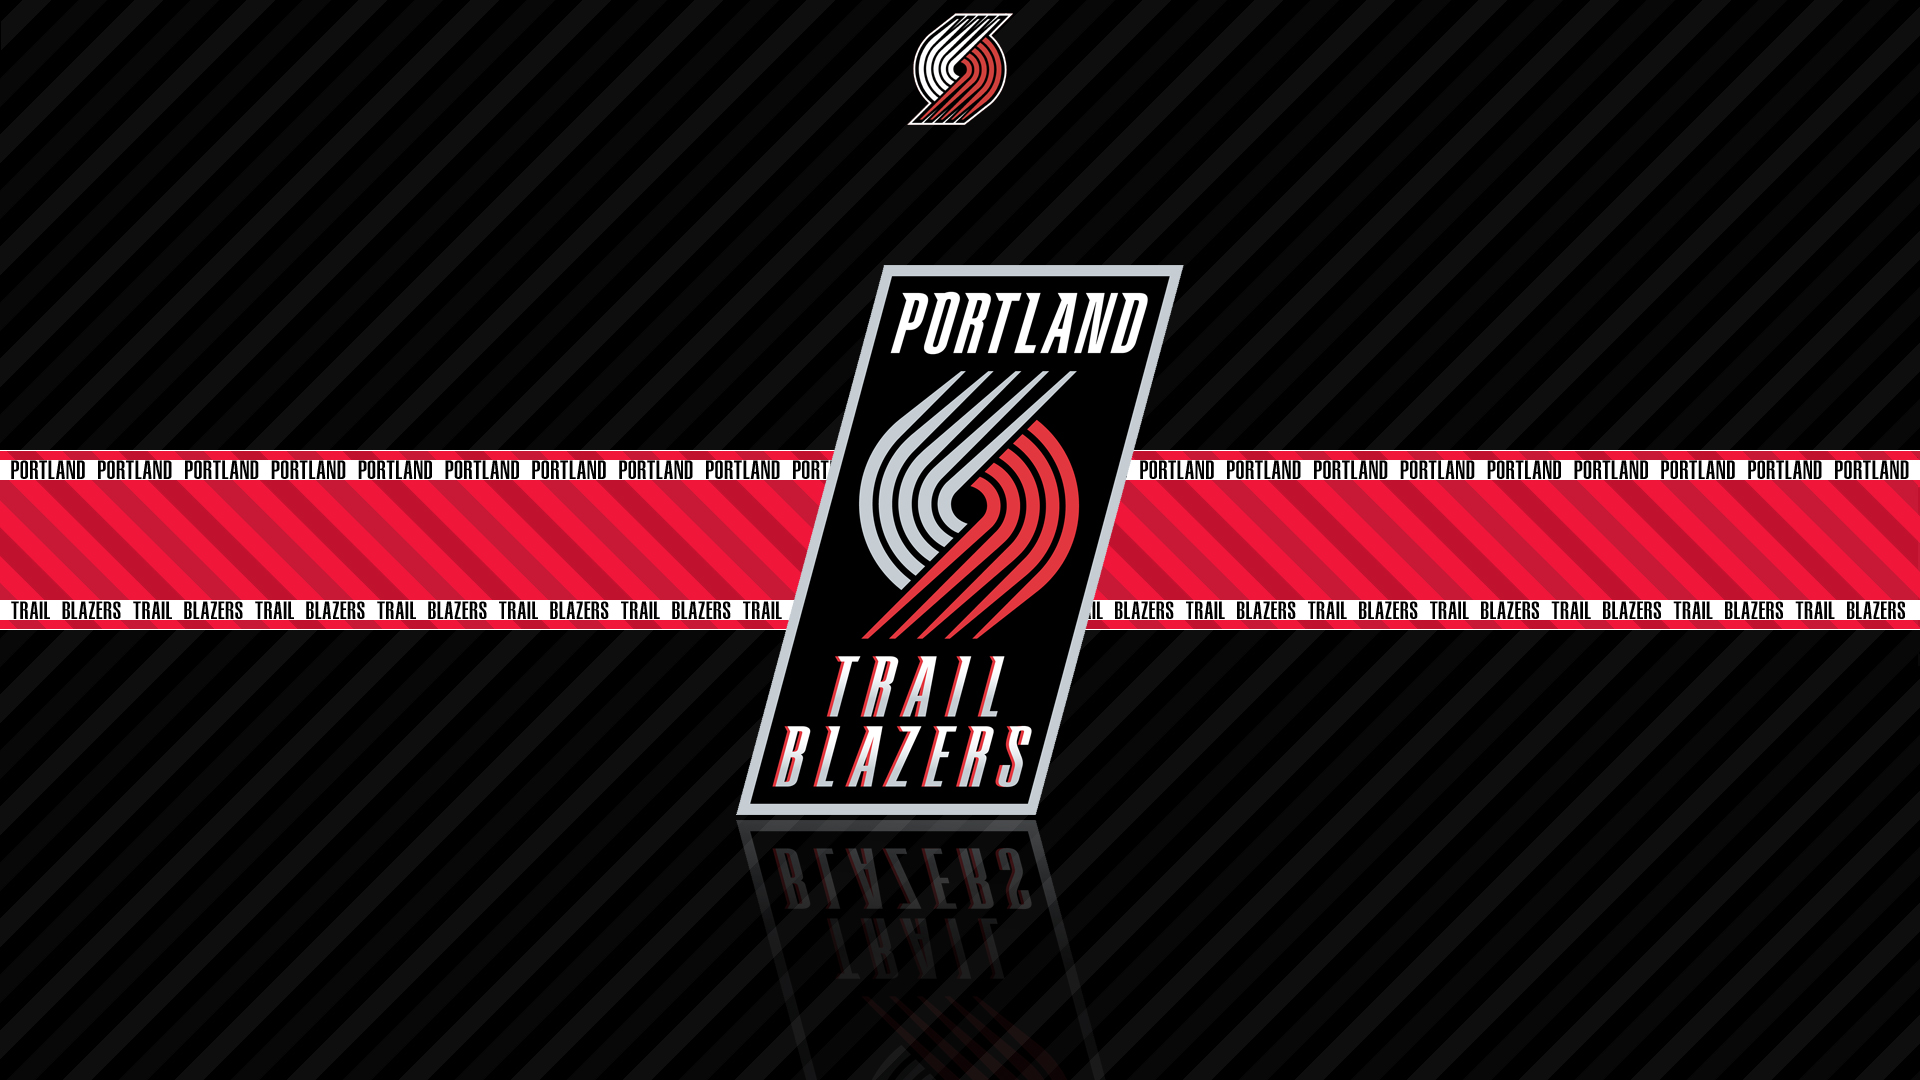 Portland Trail Blazers on Twitter You deserve these new wallpapers  WallpaperWednesday httpstcosiLcNCqICj  Twitter